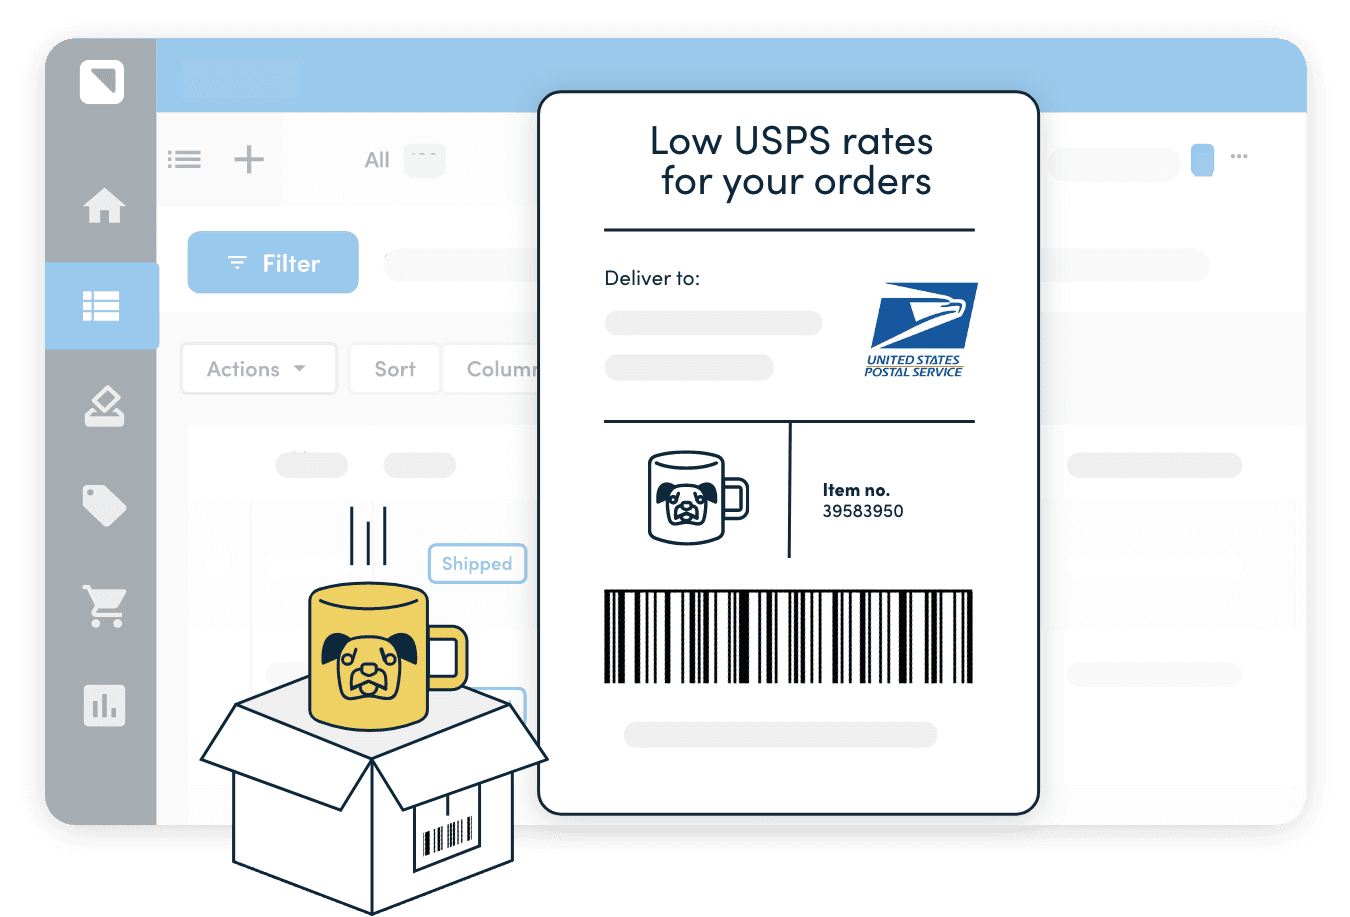 Immediate access to USPS discounted rates